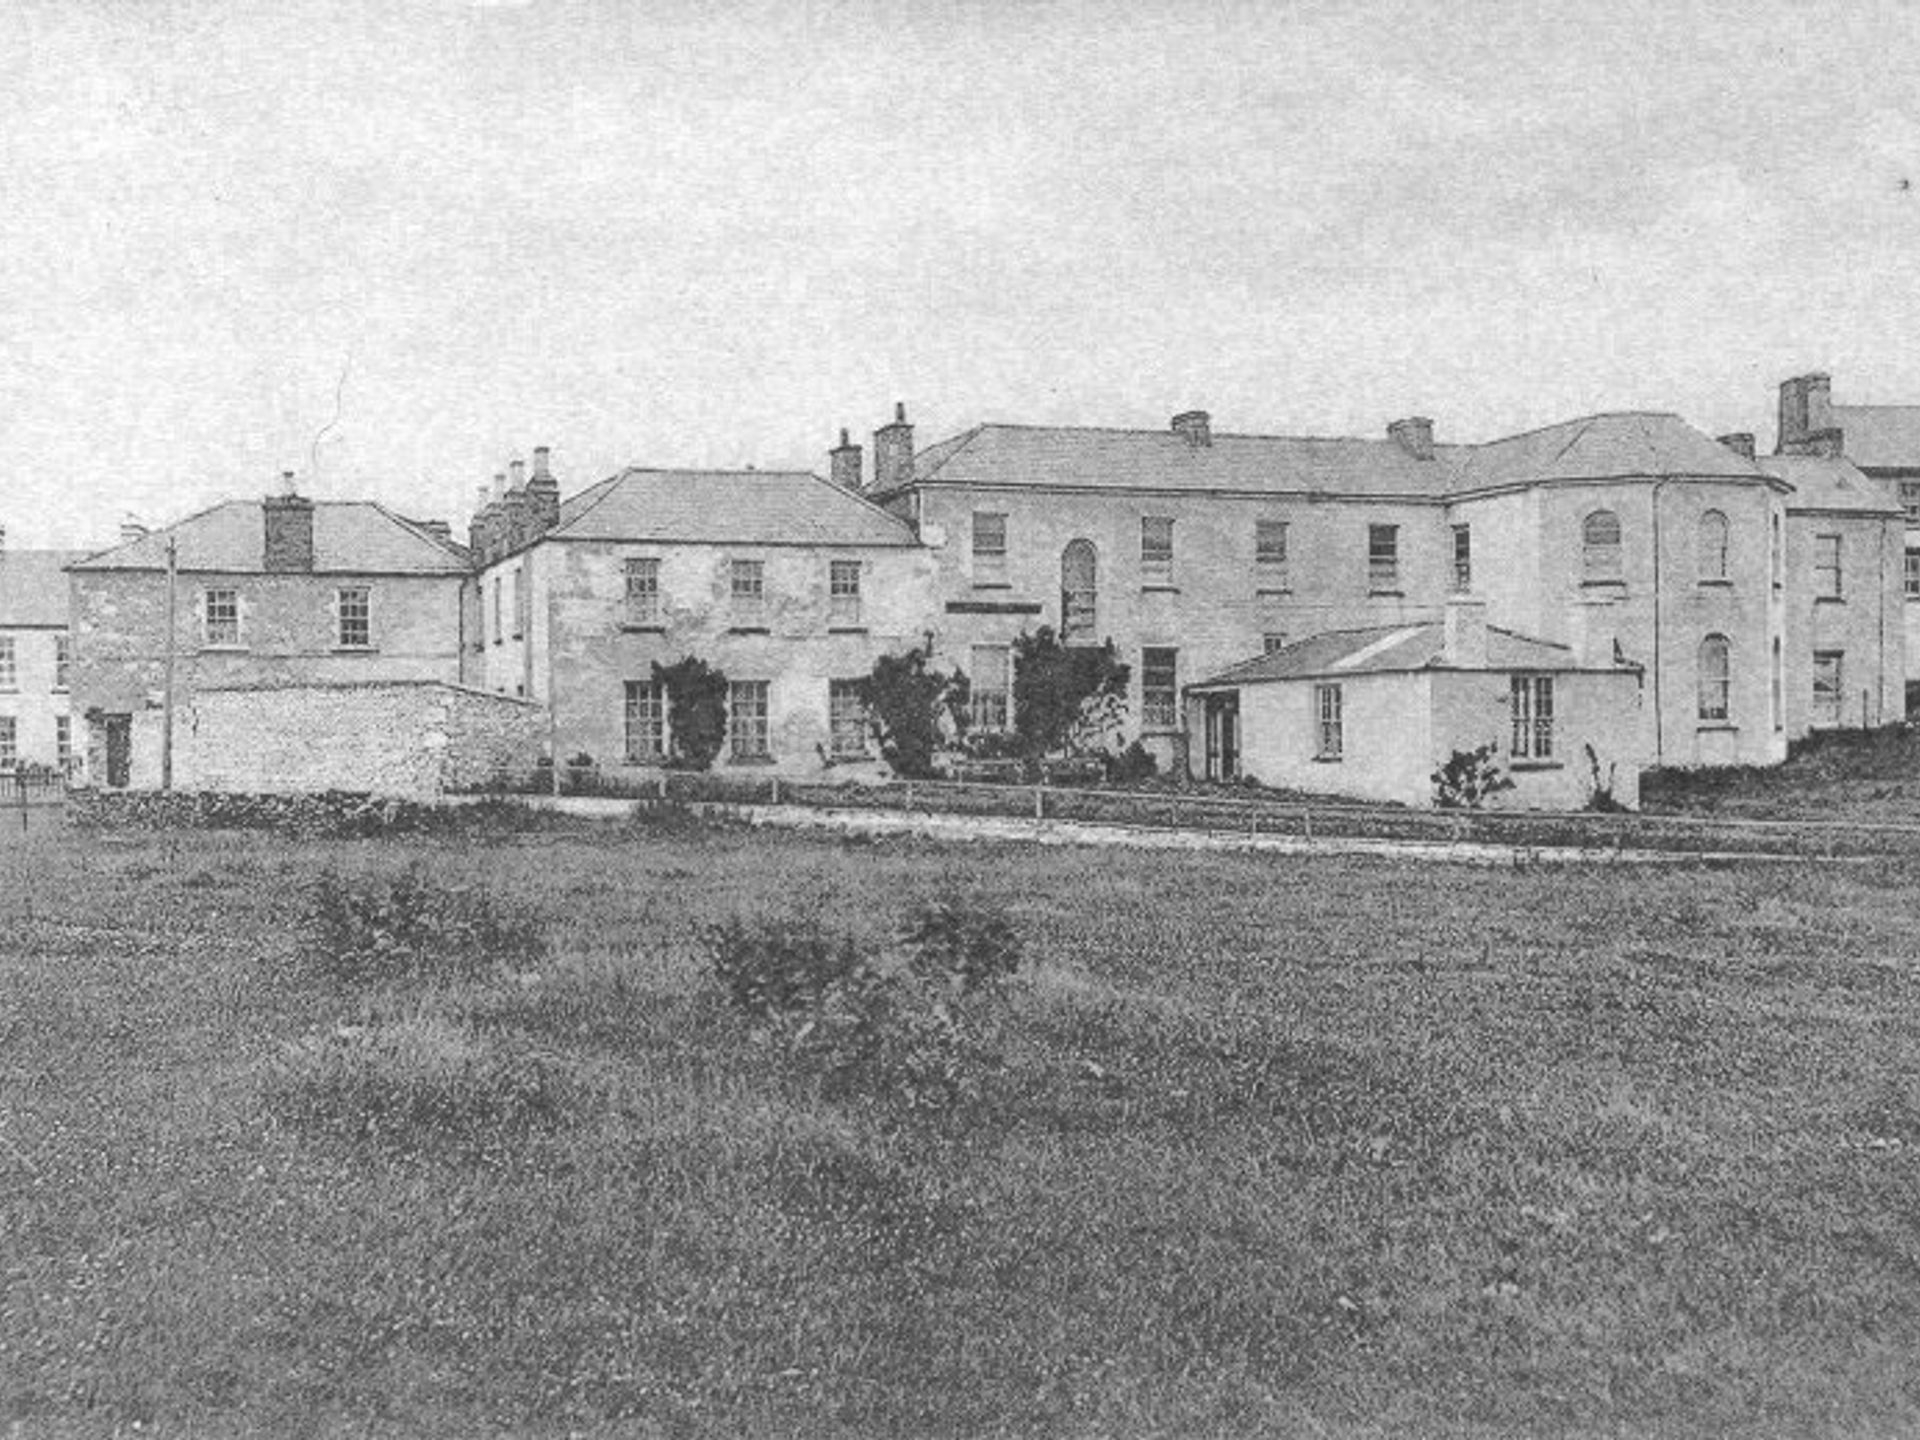 Royal Spa Hotel opened, built by John Reidy in 1832